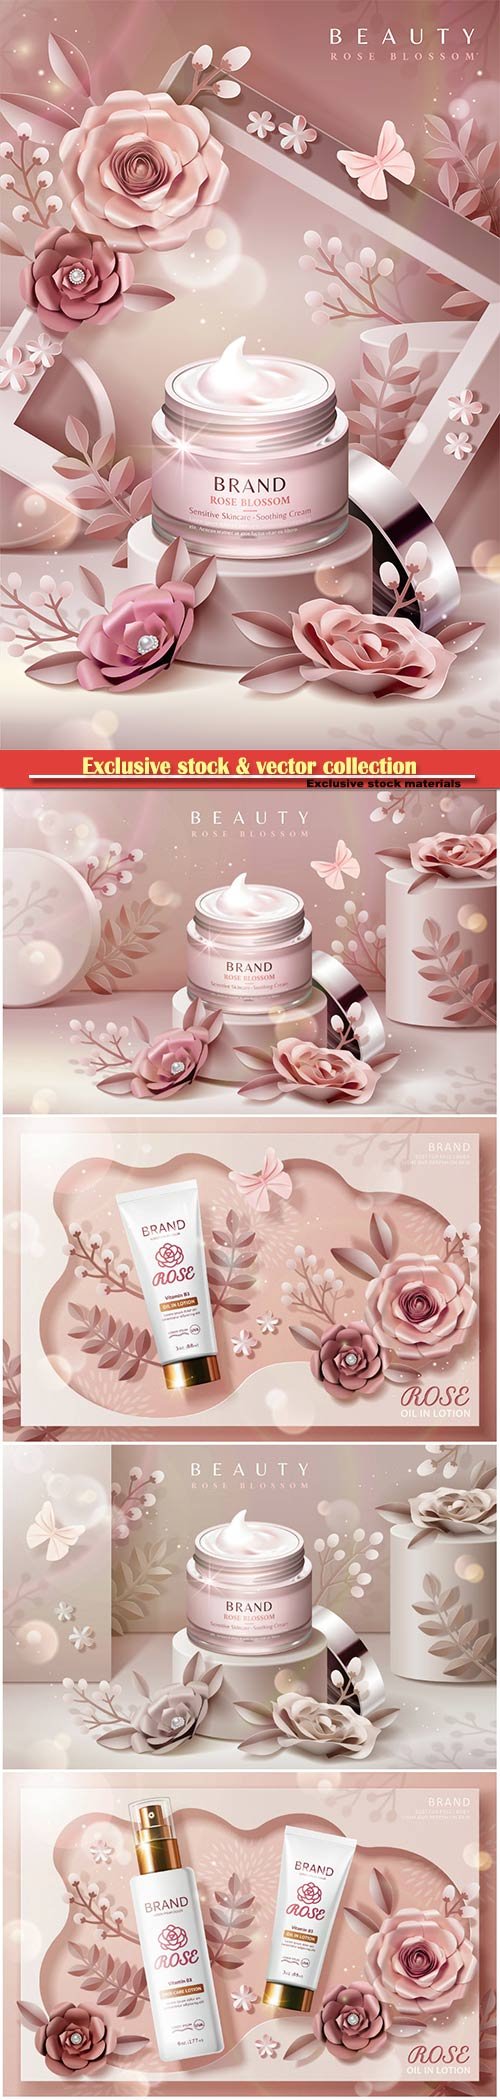 Cream jar ads on podium with paper flowers and frame background in 3d illustration